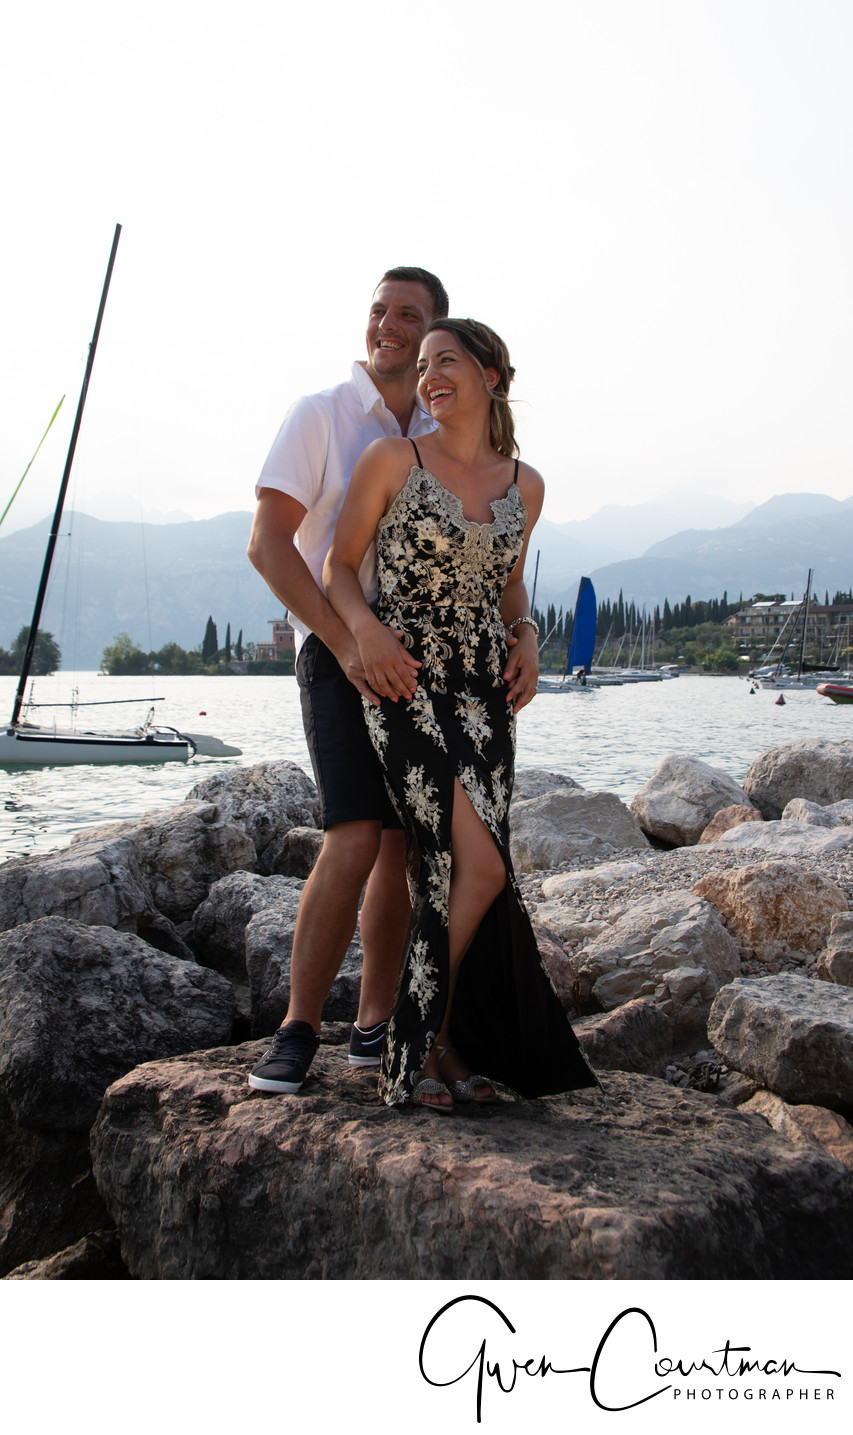 Carla and Marc's 1 year anniversary photo shoot in Malcesine